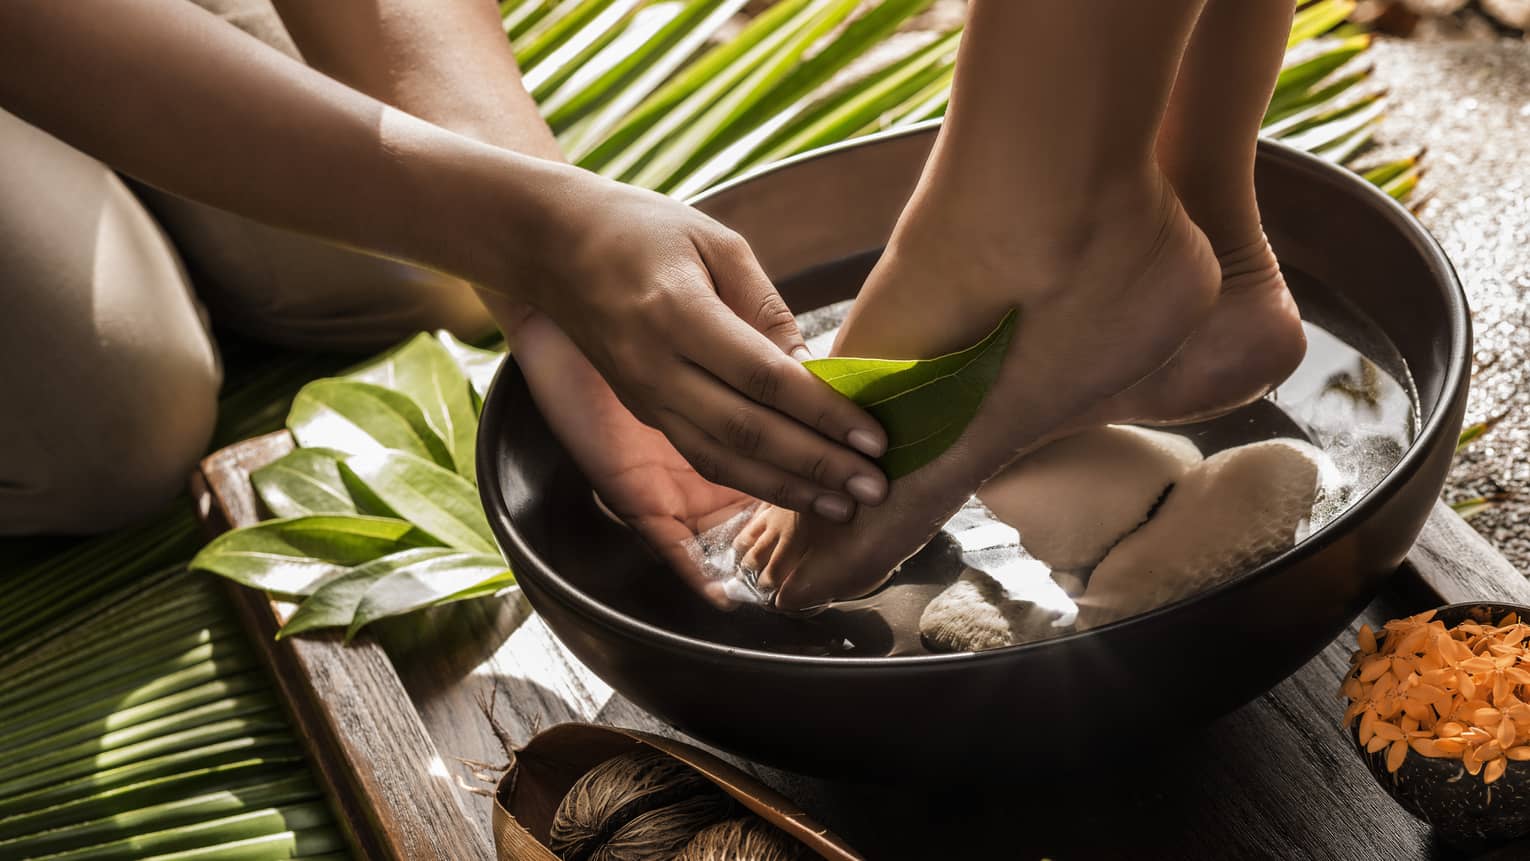 Close-up of woman's feet in round wood bowl as hands run tropical leaf over foot